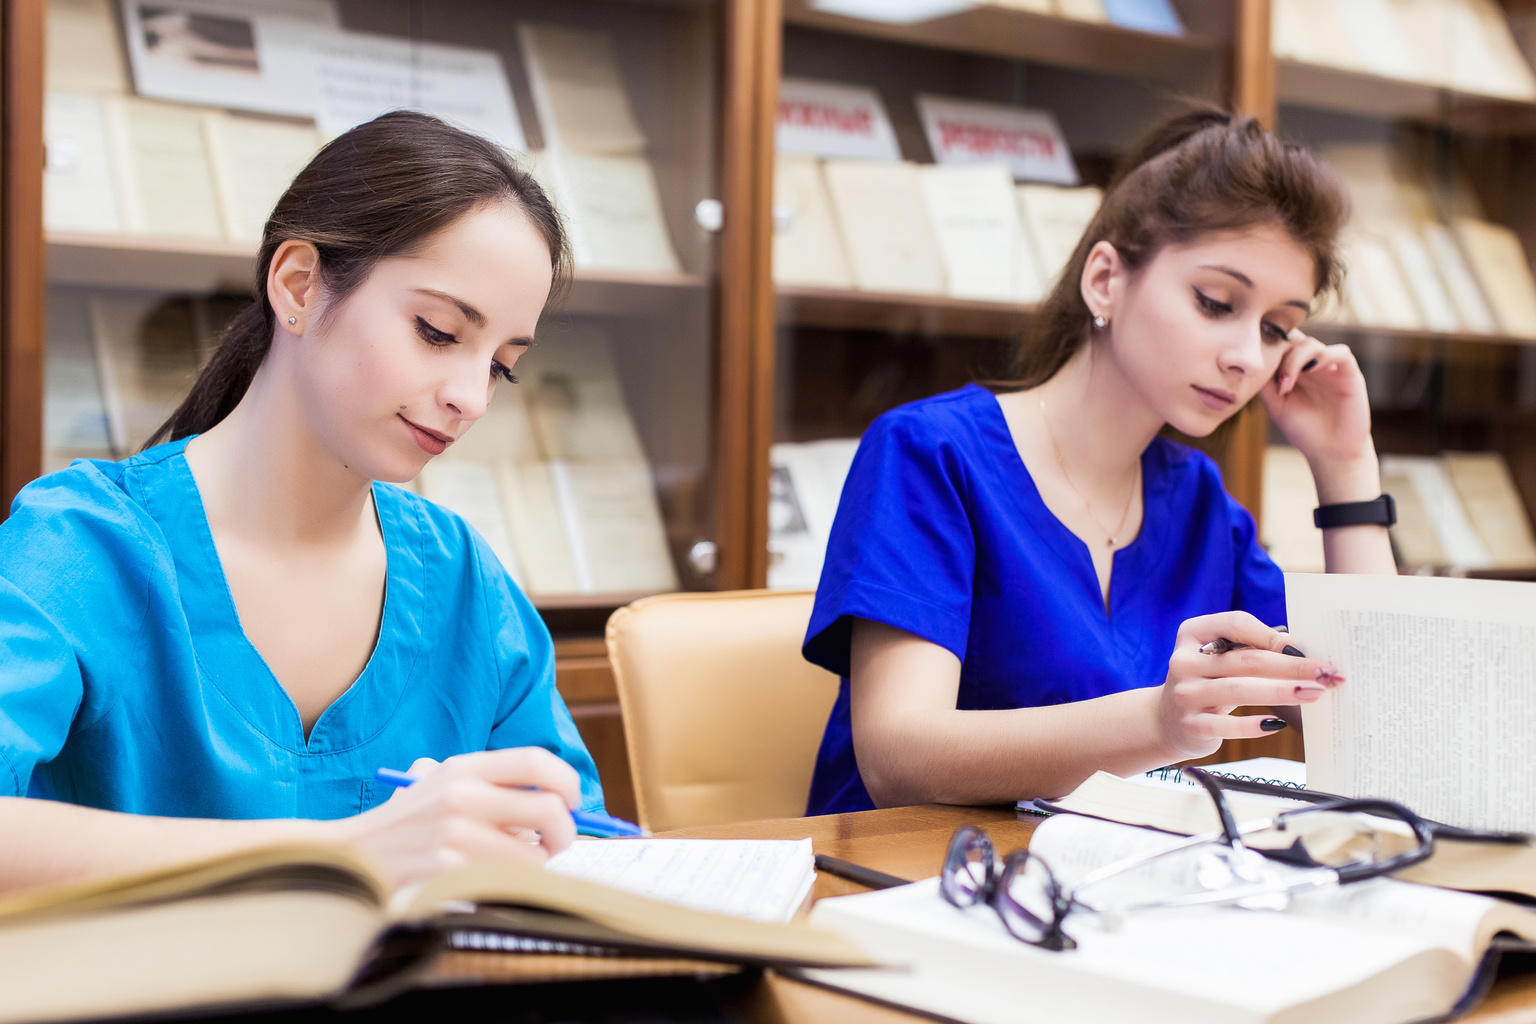 How to connect with senior medical students